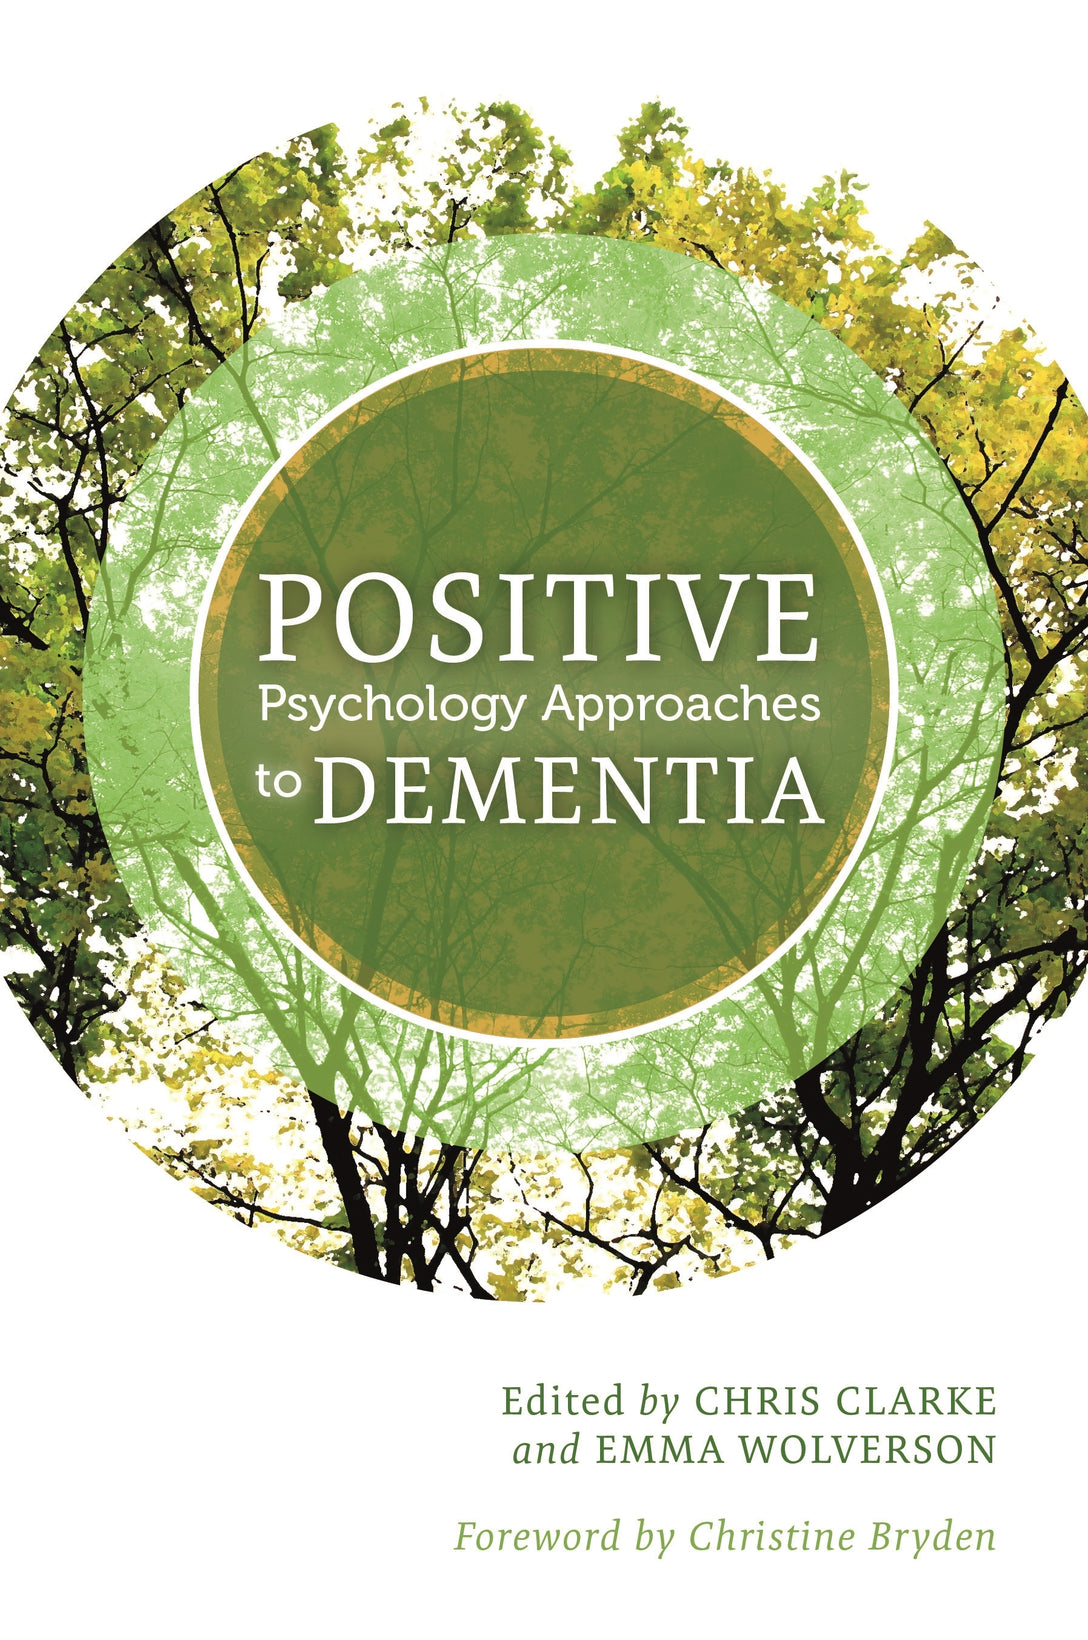 Positive Psychology Approaches to Dementia by Chris Clarke, Emma Wolverson, Christine Bryden, No Author Listed